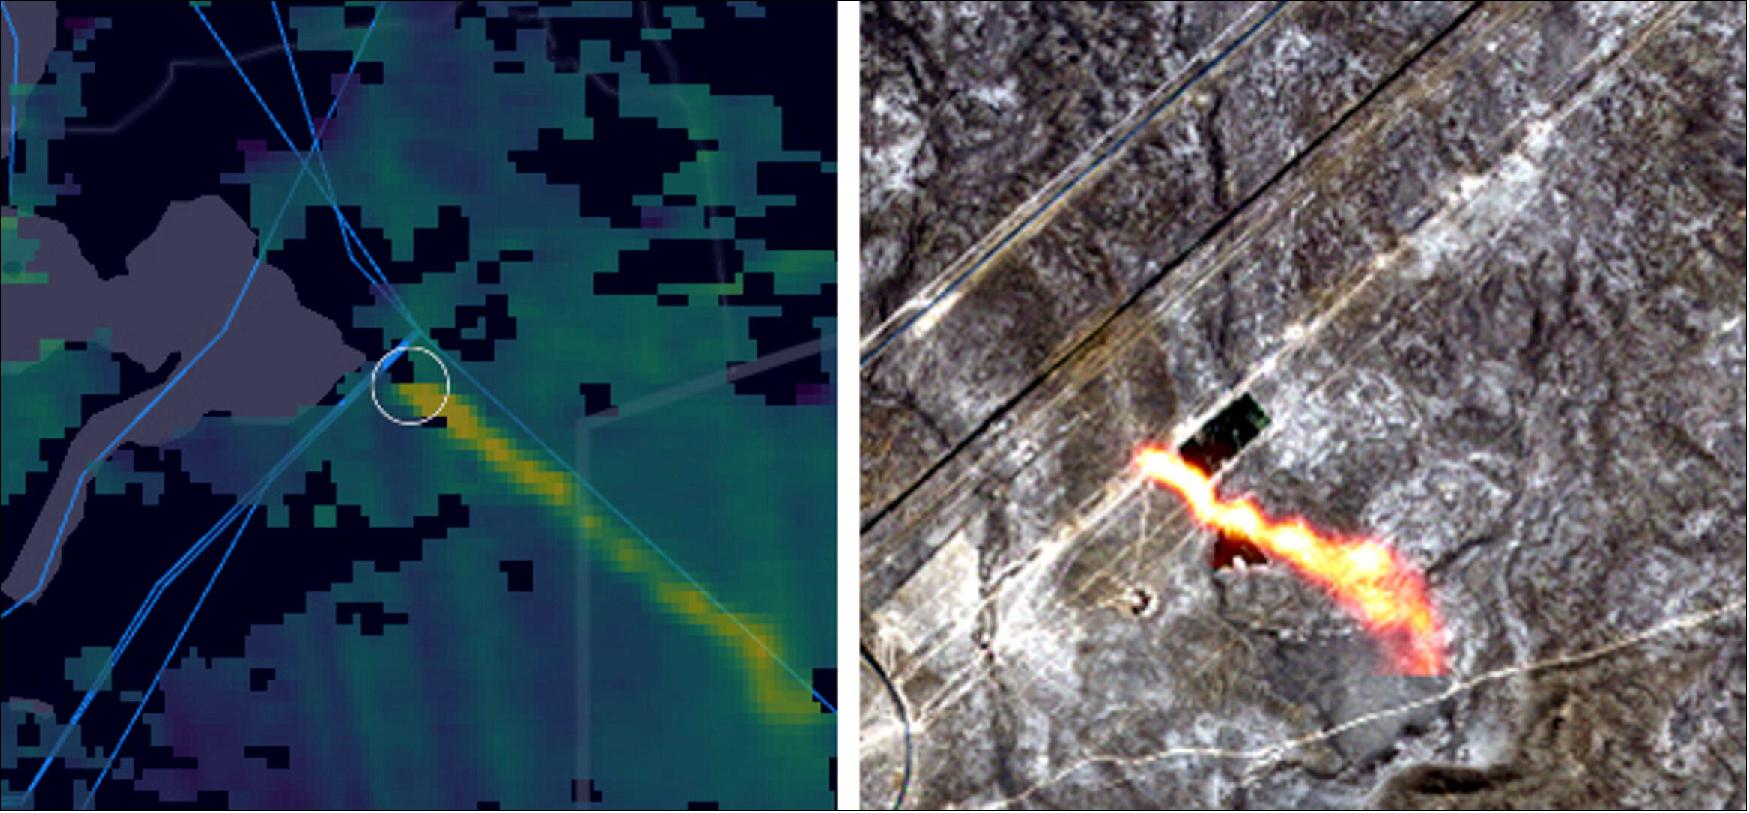 Figure 39: The images show methane hotspots over a gas pipeline in Kazakhstan detected by the Copernicus Sentinel-5P mission (left) and Copernicus Sentinel-2 mission (right), image credit: ESA, the images contain modified Copernicus data (2020), processed by Kayrros